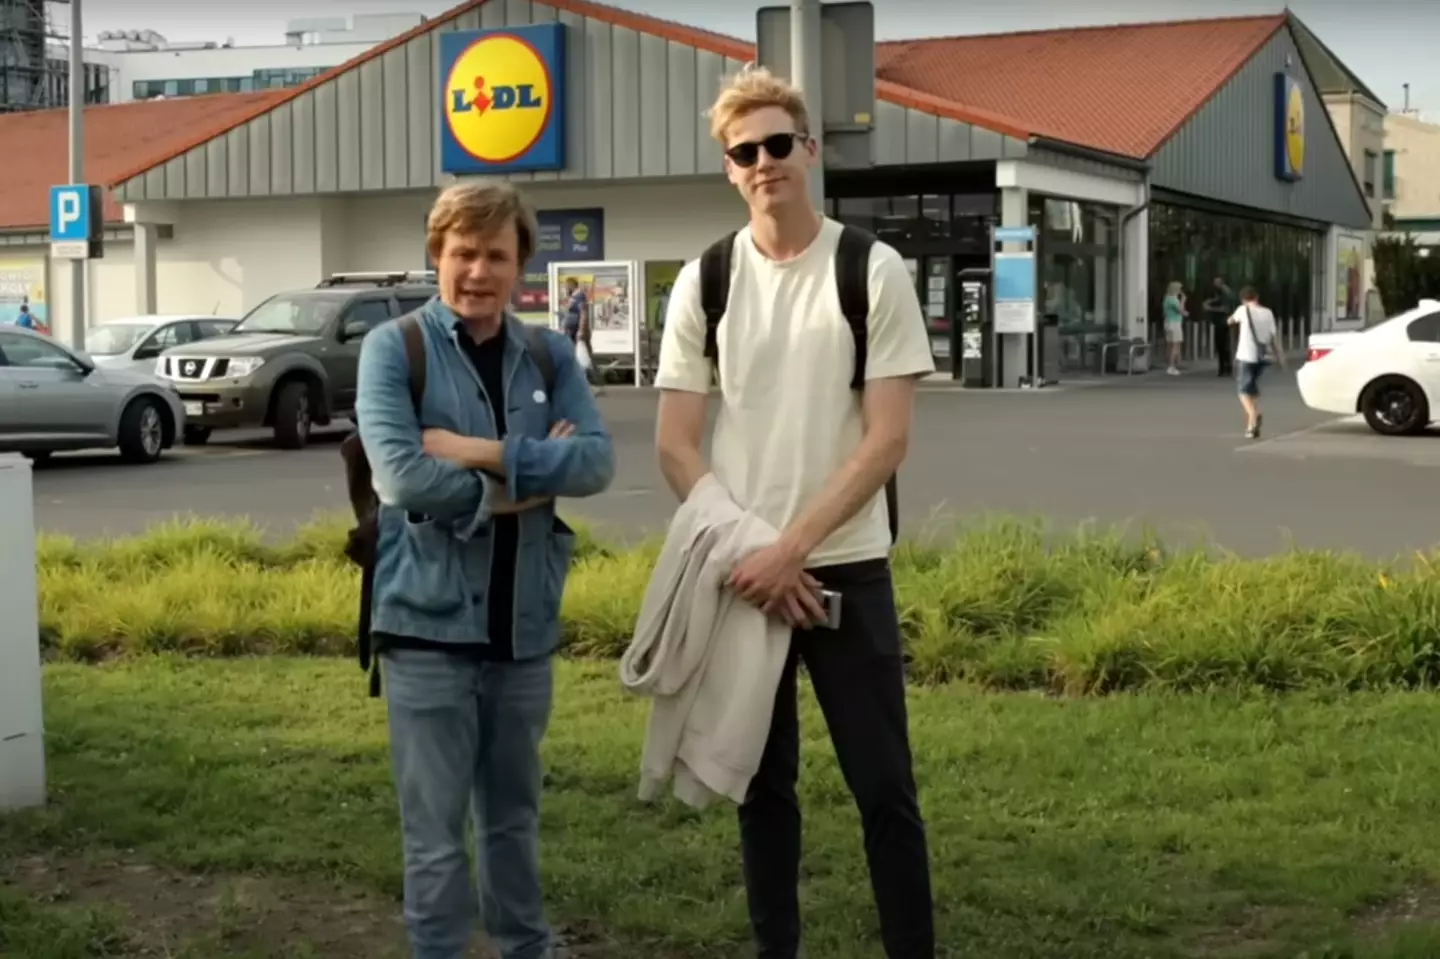 These two YouTubers headed to Poland for a bargain.